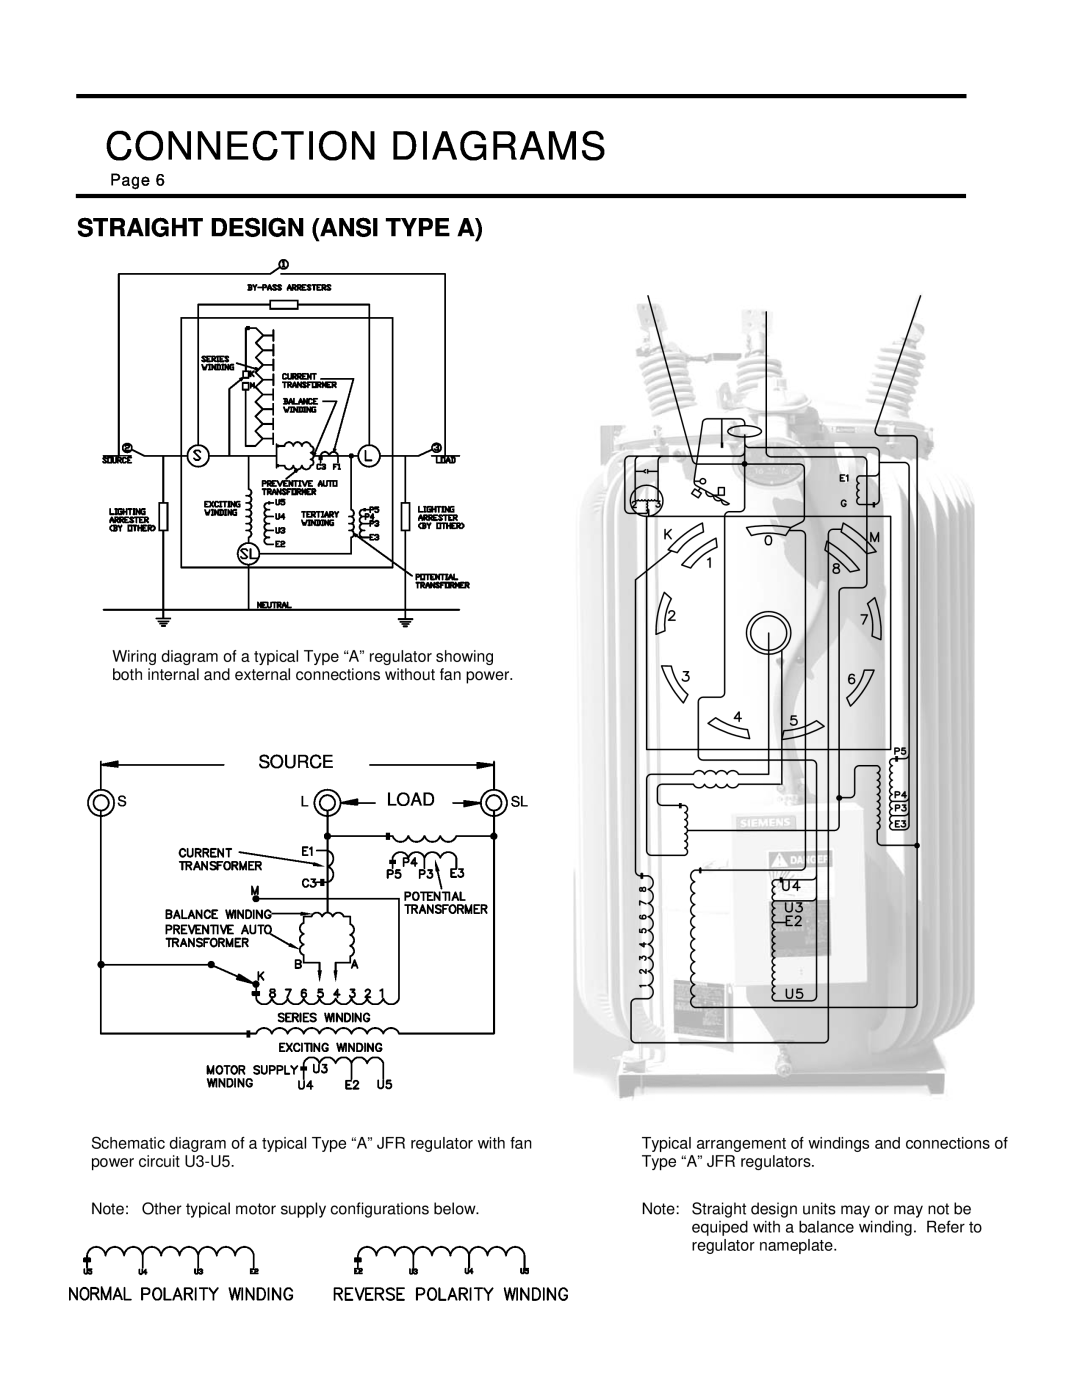 Siemens 21-115532-001 manual Connection Diagrams, Source, Load, Straight Design Ansi Type A 